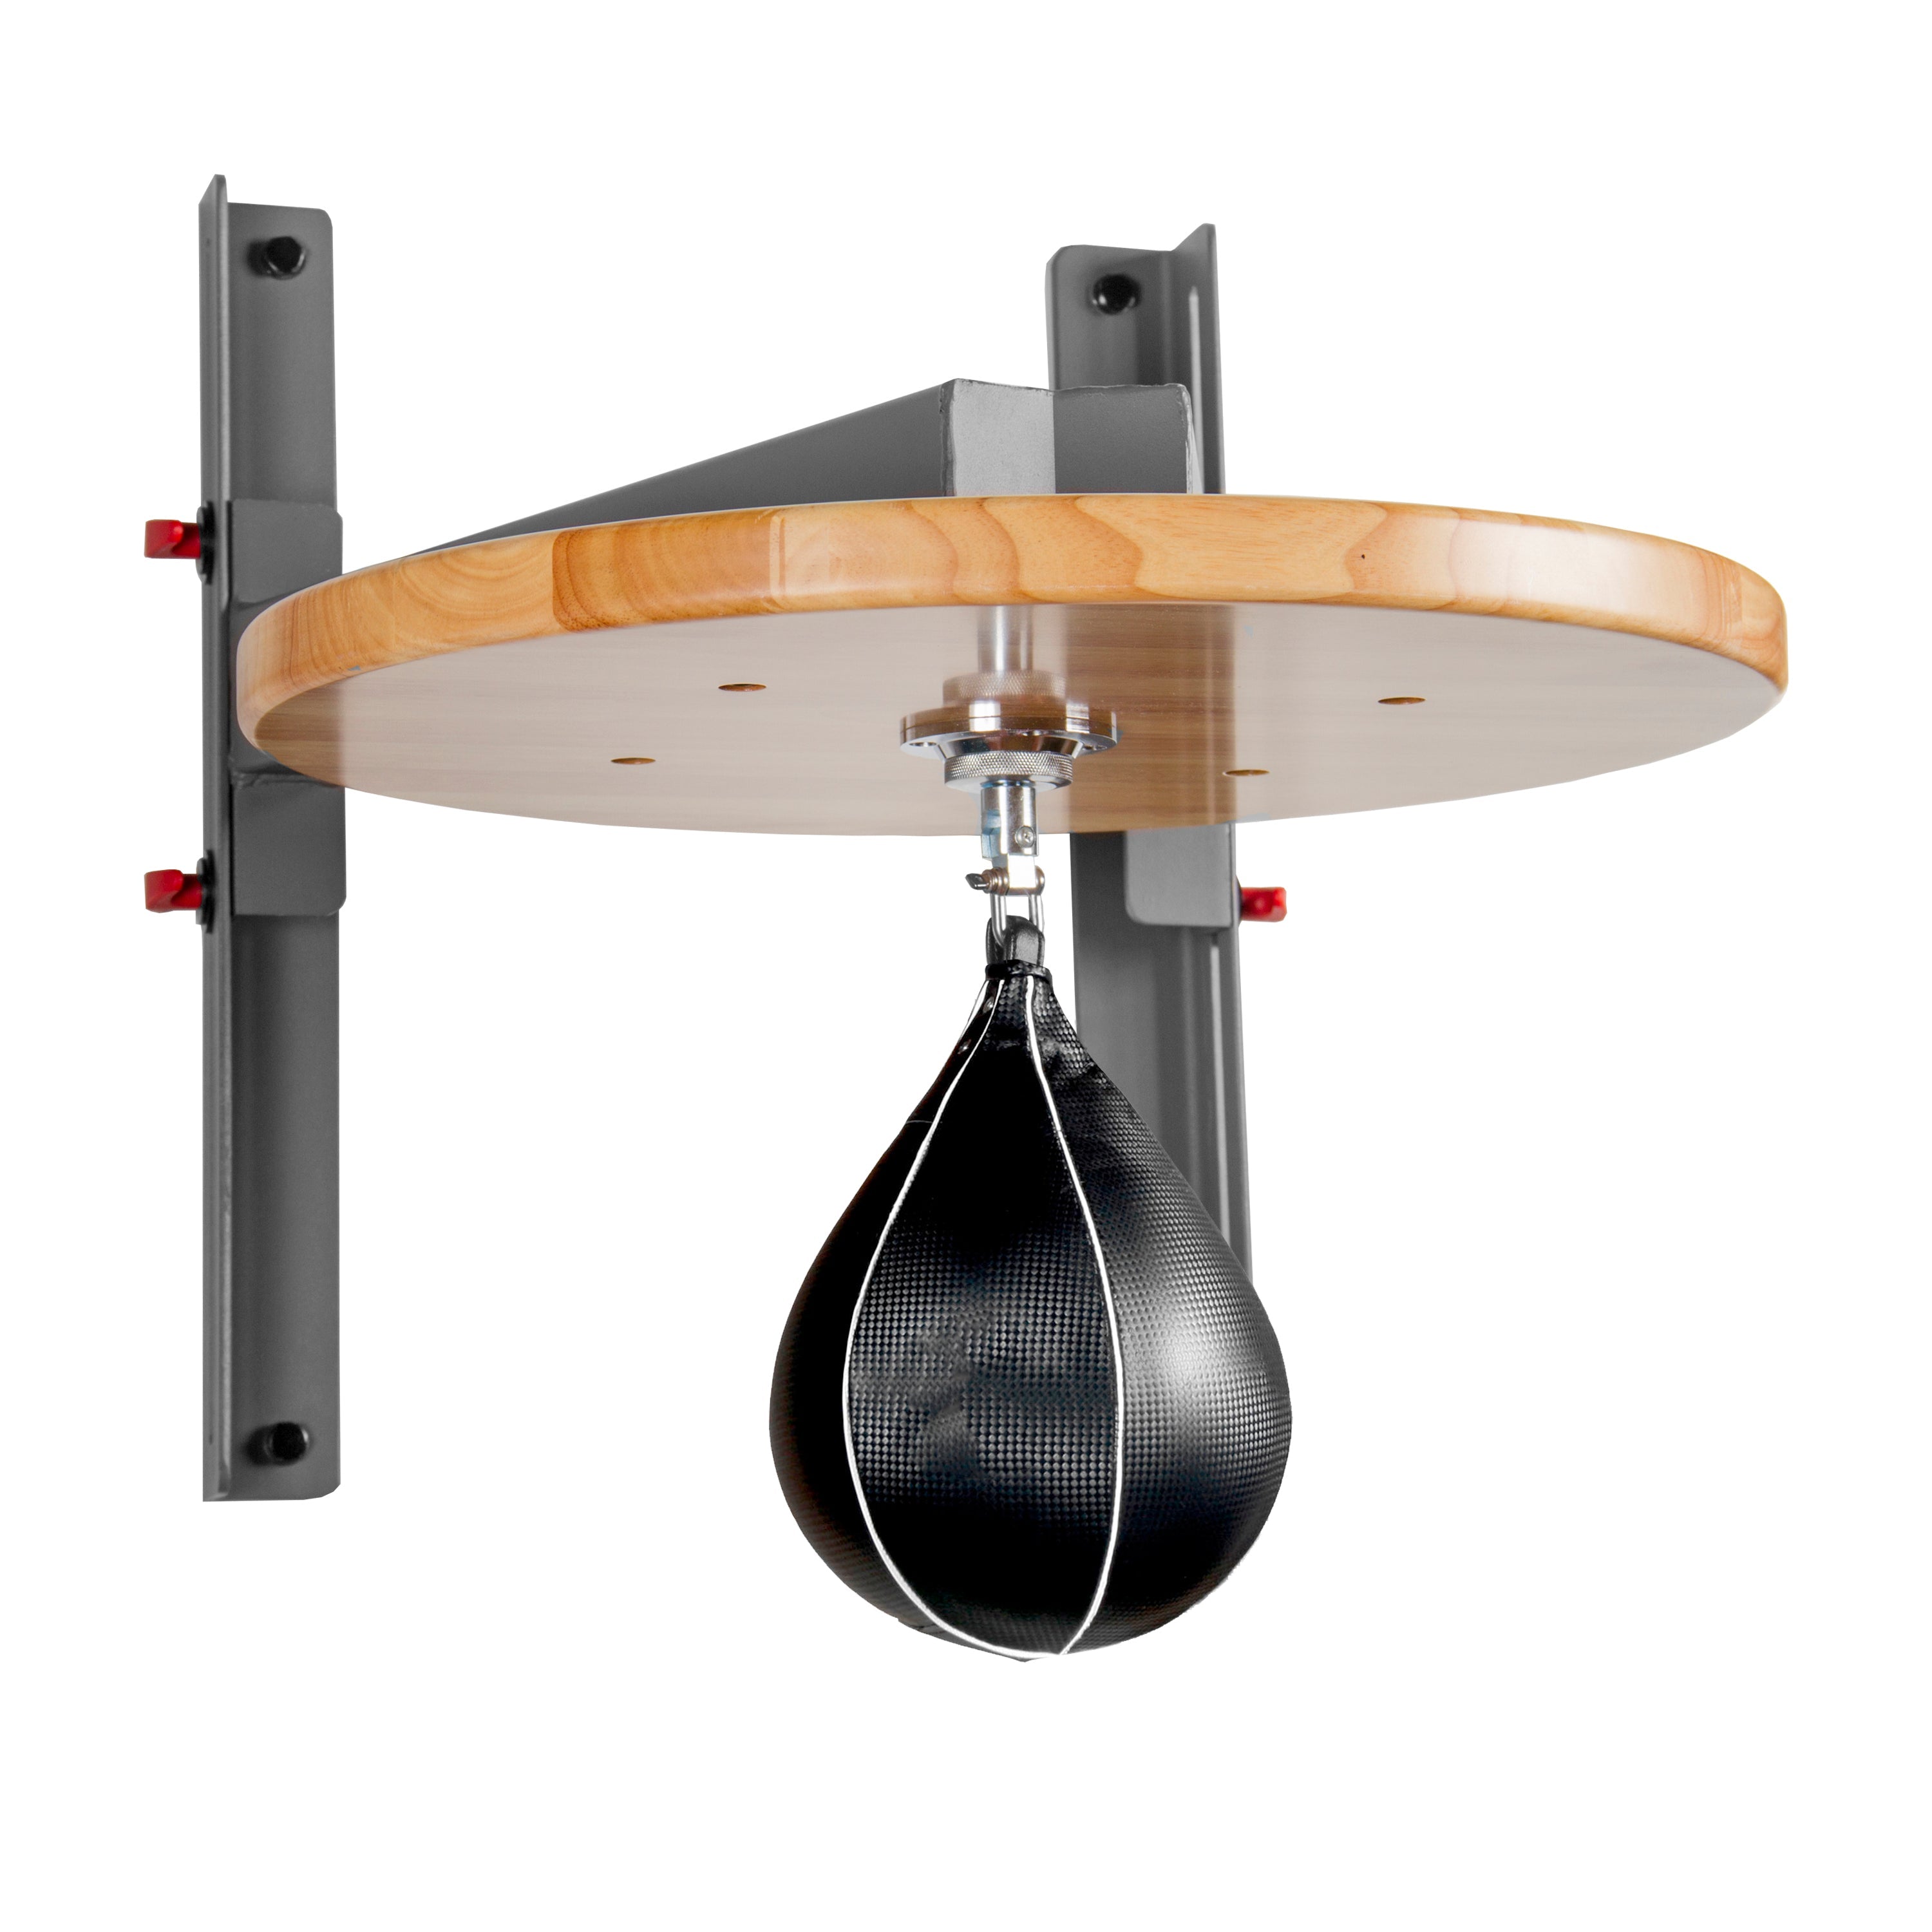 Wall Mounted Speed Bag Platform for Boxing